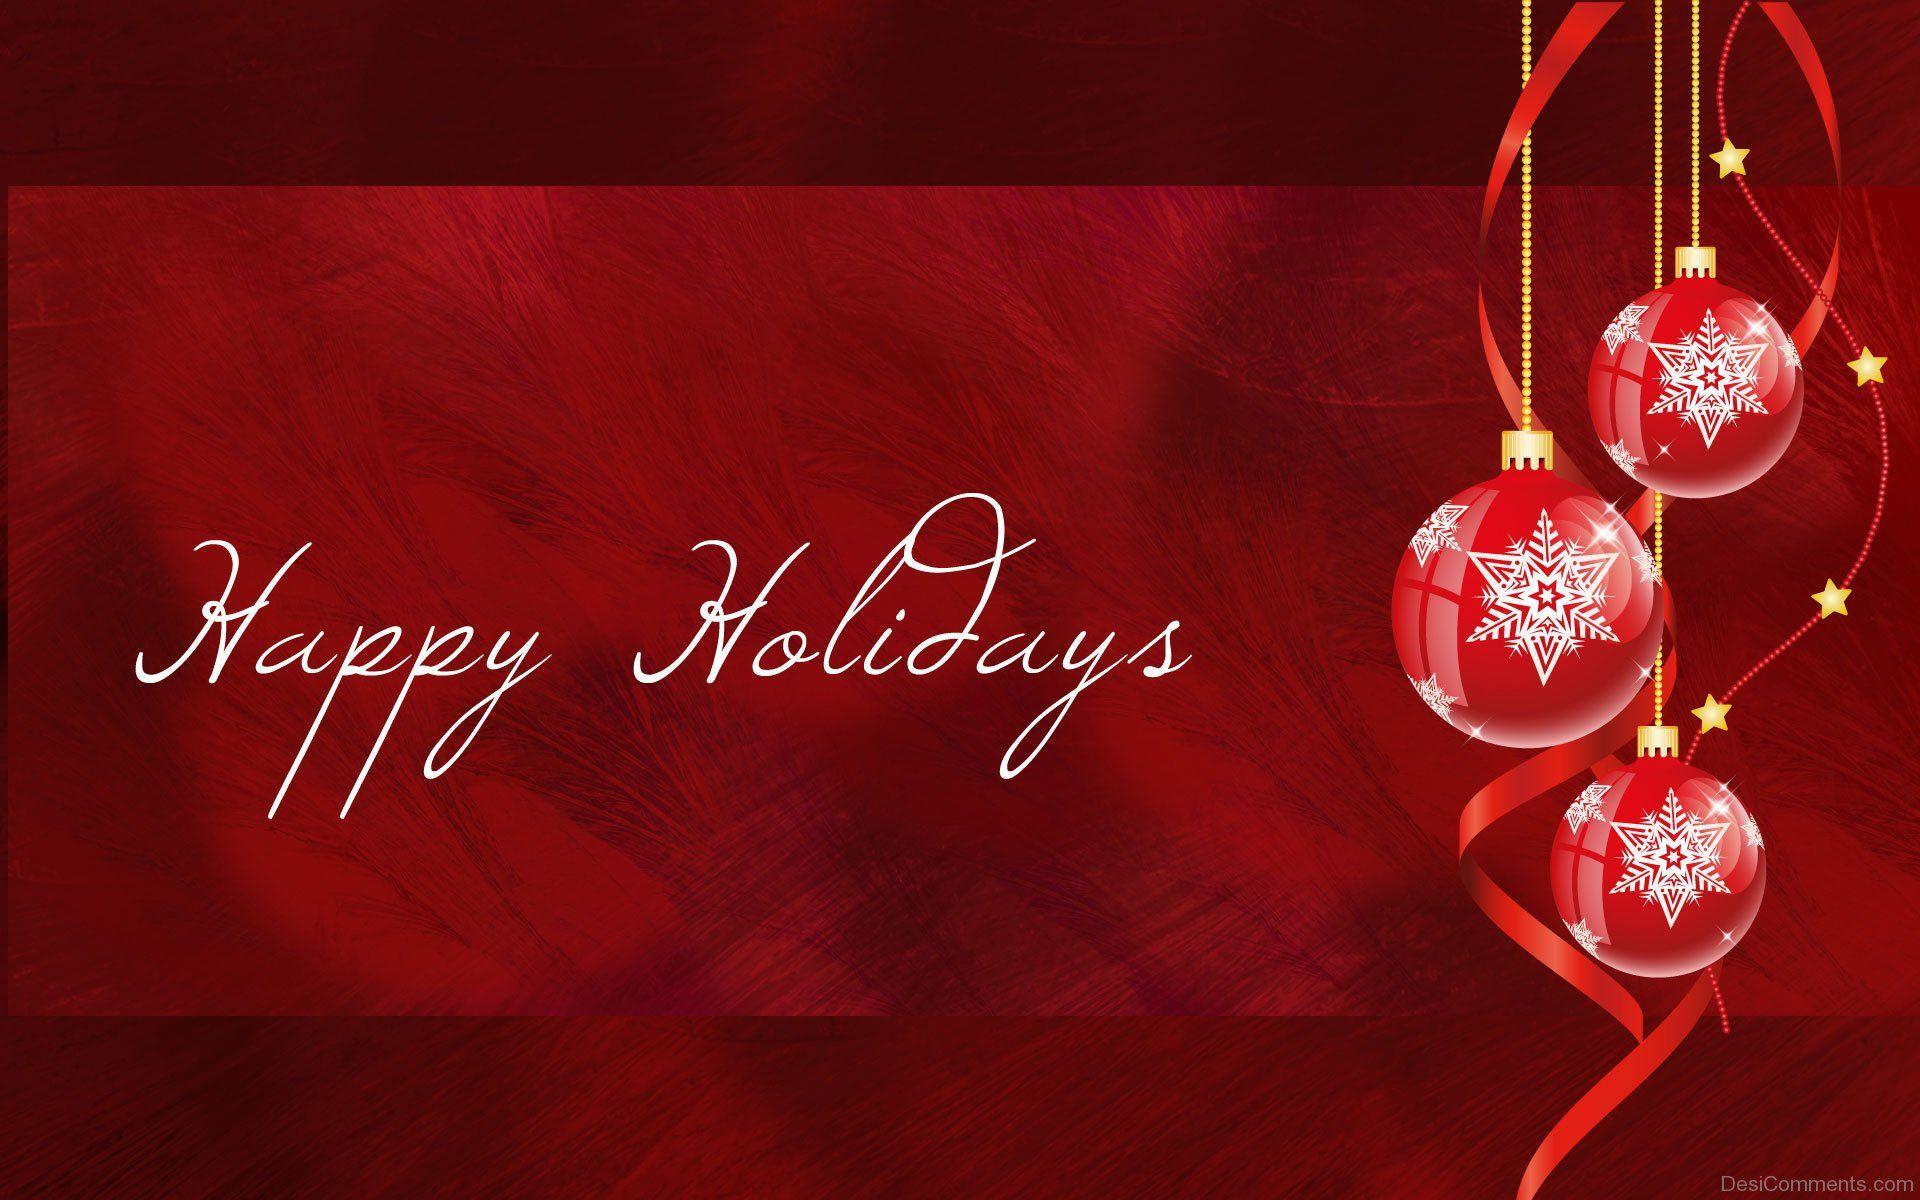 Happy Holidays Picture, Image, Graphics for Facebook, Whatsapp